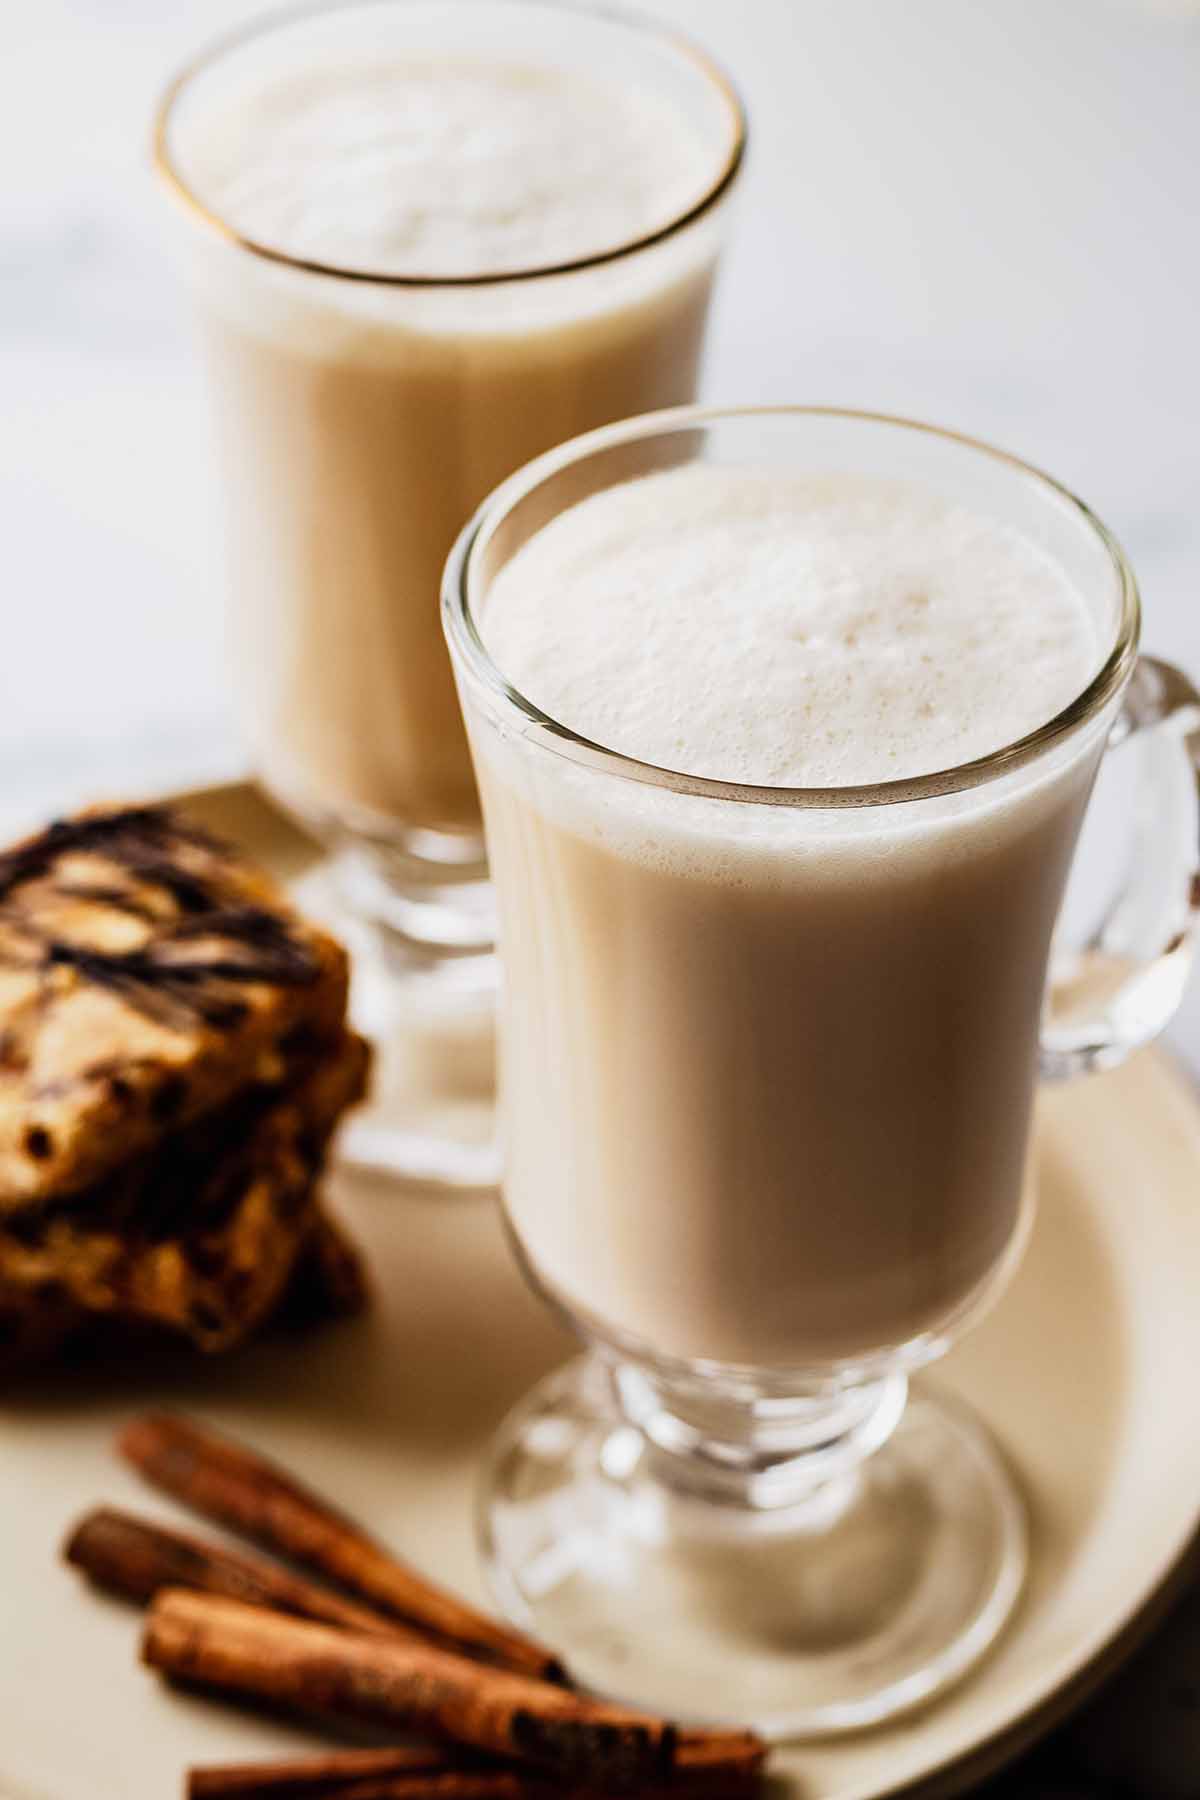 Close up view of two chai tea lattes in glass mugs sitting on a creamy white plate with a stack of granola bars and cinnamon sticks.